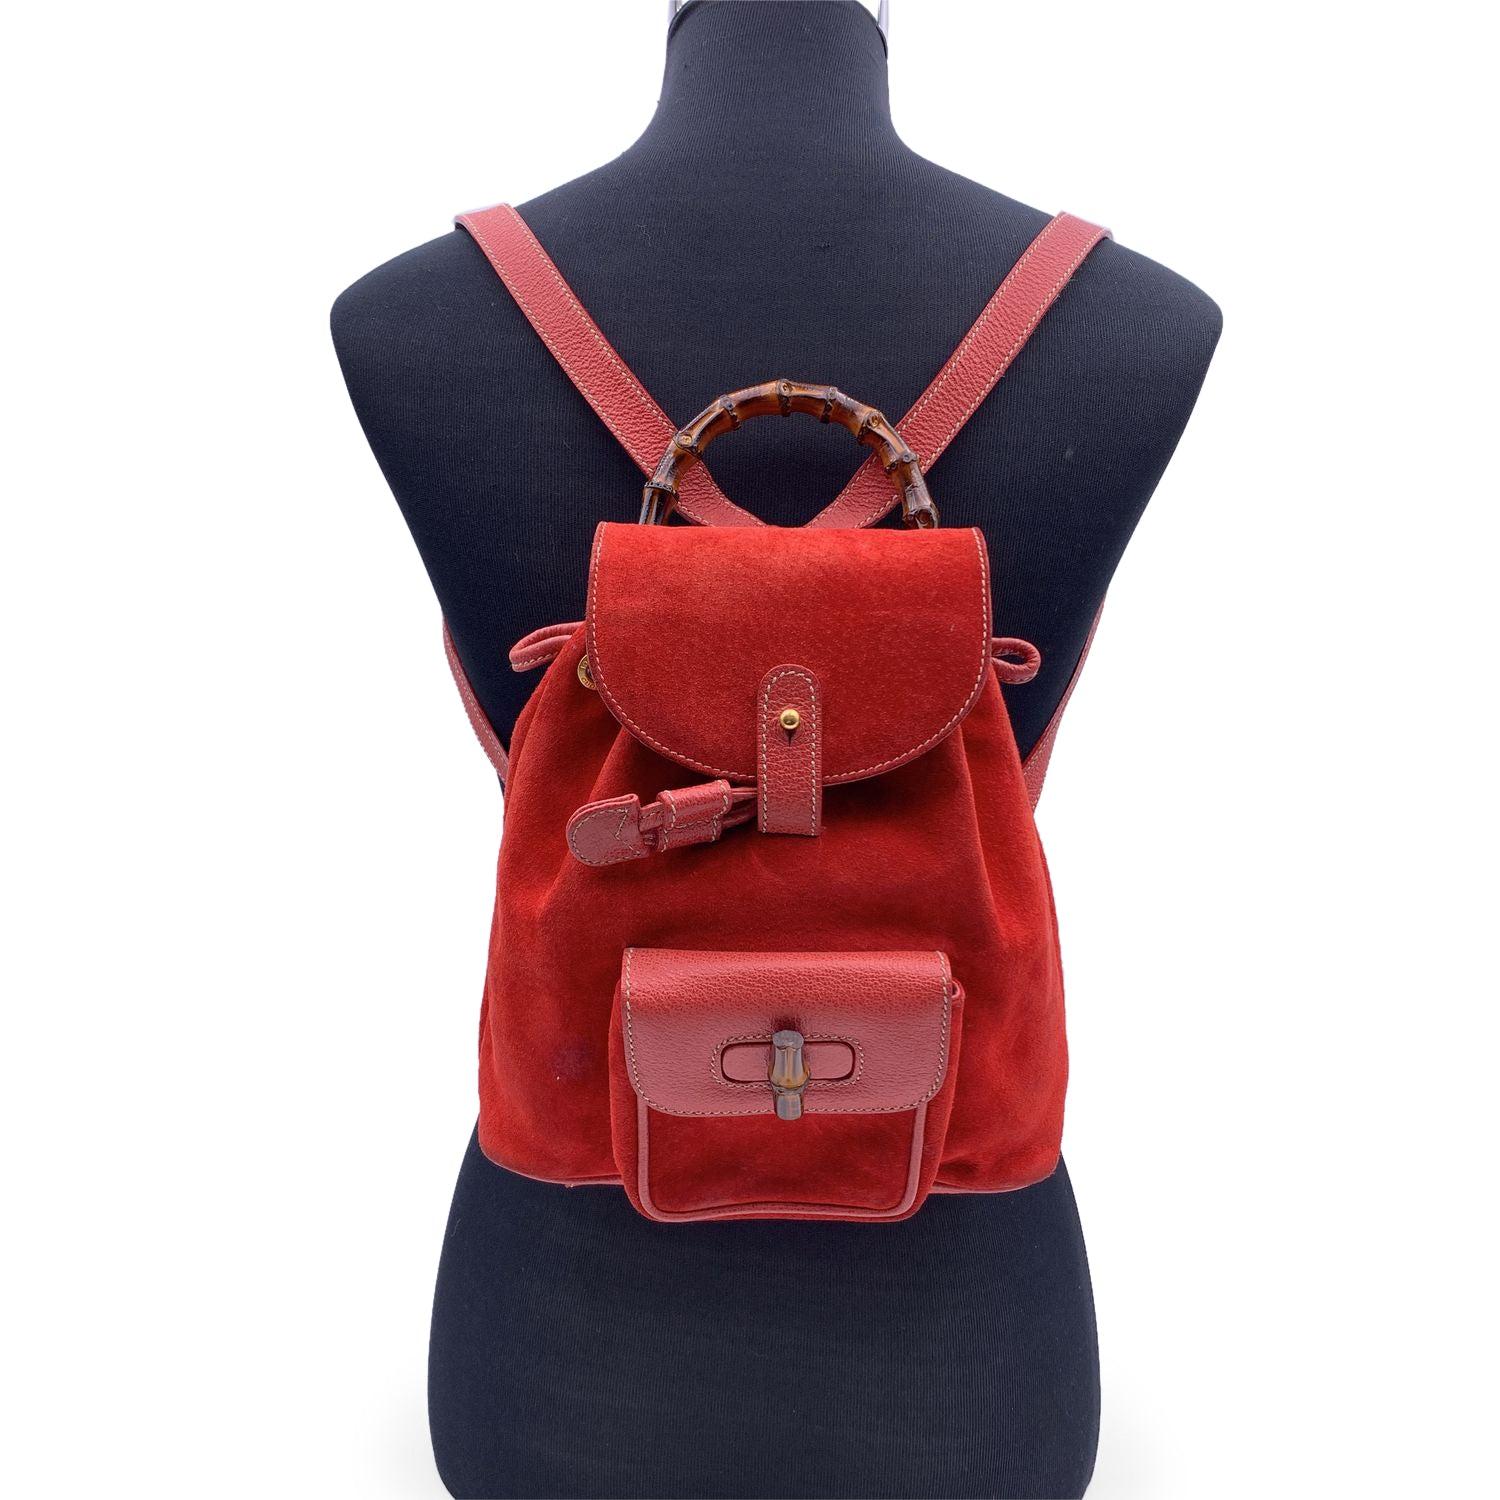 Vintage small backpack by Gucci, crafted in red suede and leather. It features Bamboo handle and and knob. 1 front pocket with twist lock closure. Flap closure and drawstring top opening. Gold metal hardware. Internal diamond lining. 1 side zip